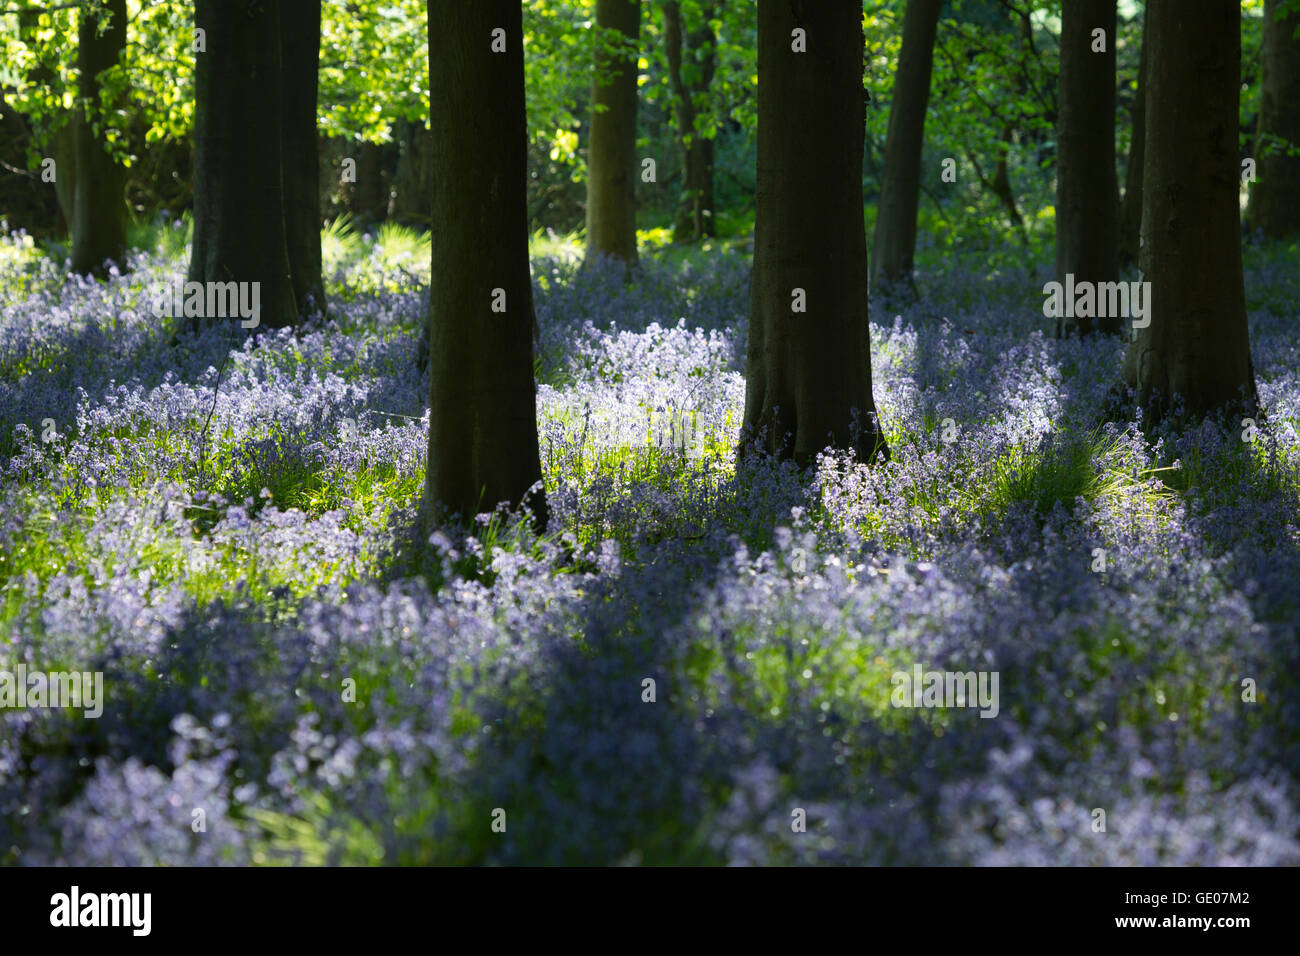 Bluebell wood, near Stow-on-the-Wold, Cotswolds, Gloucestershire, England, United Kingdom, Europe Stock Photo